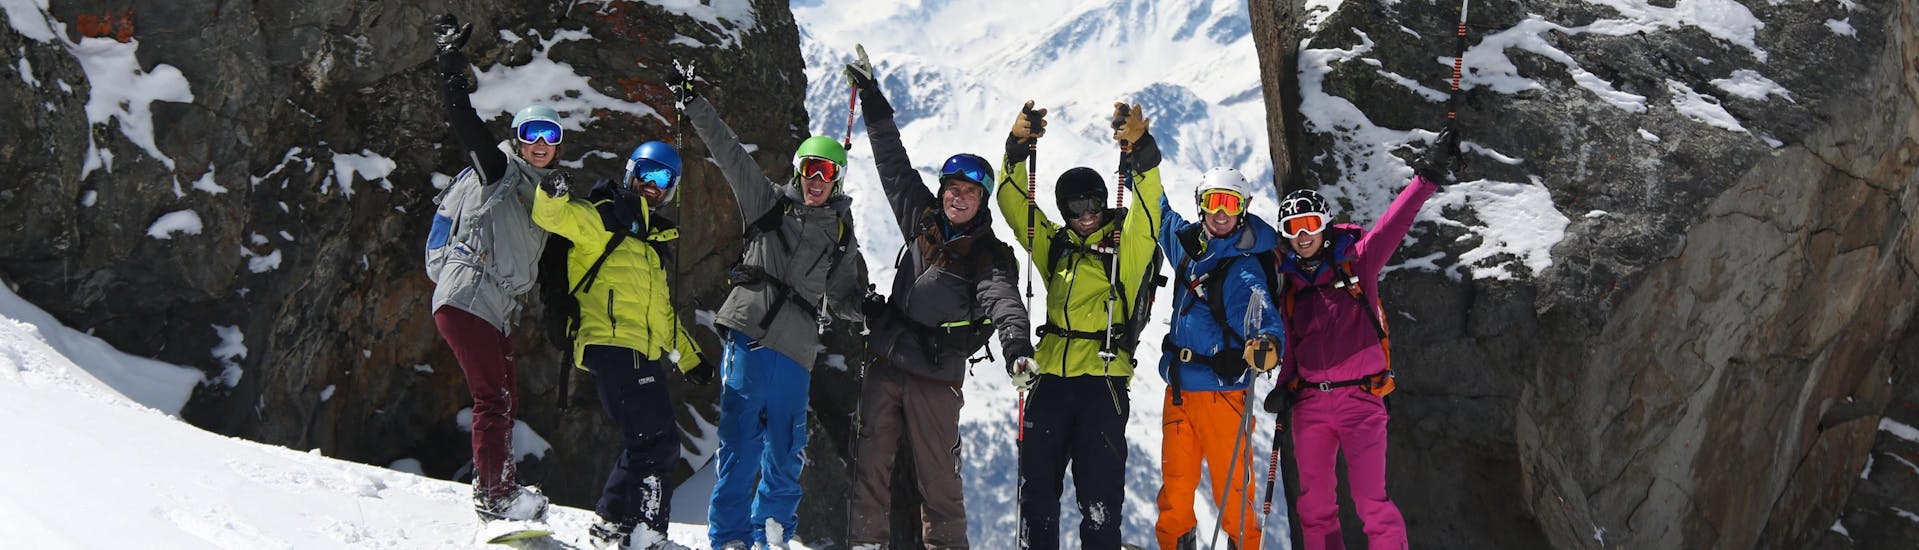 Winter sports enthusiasts are getting ready for the Off Piste Skiing Lessons for Adults - All Levels with their instructors from the school Prosneige Val d'Isère.